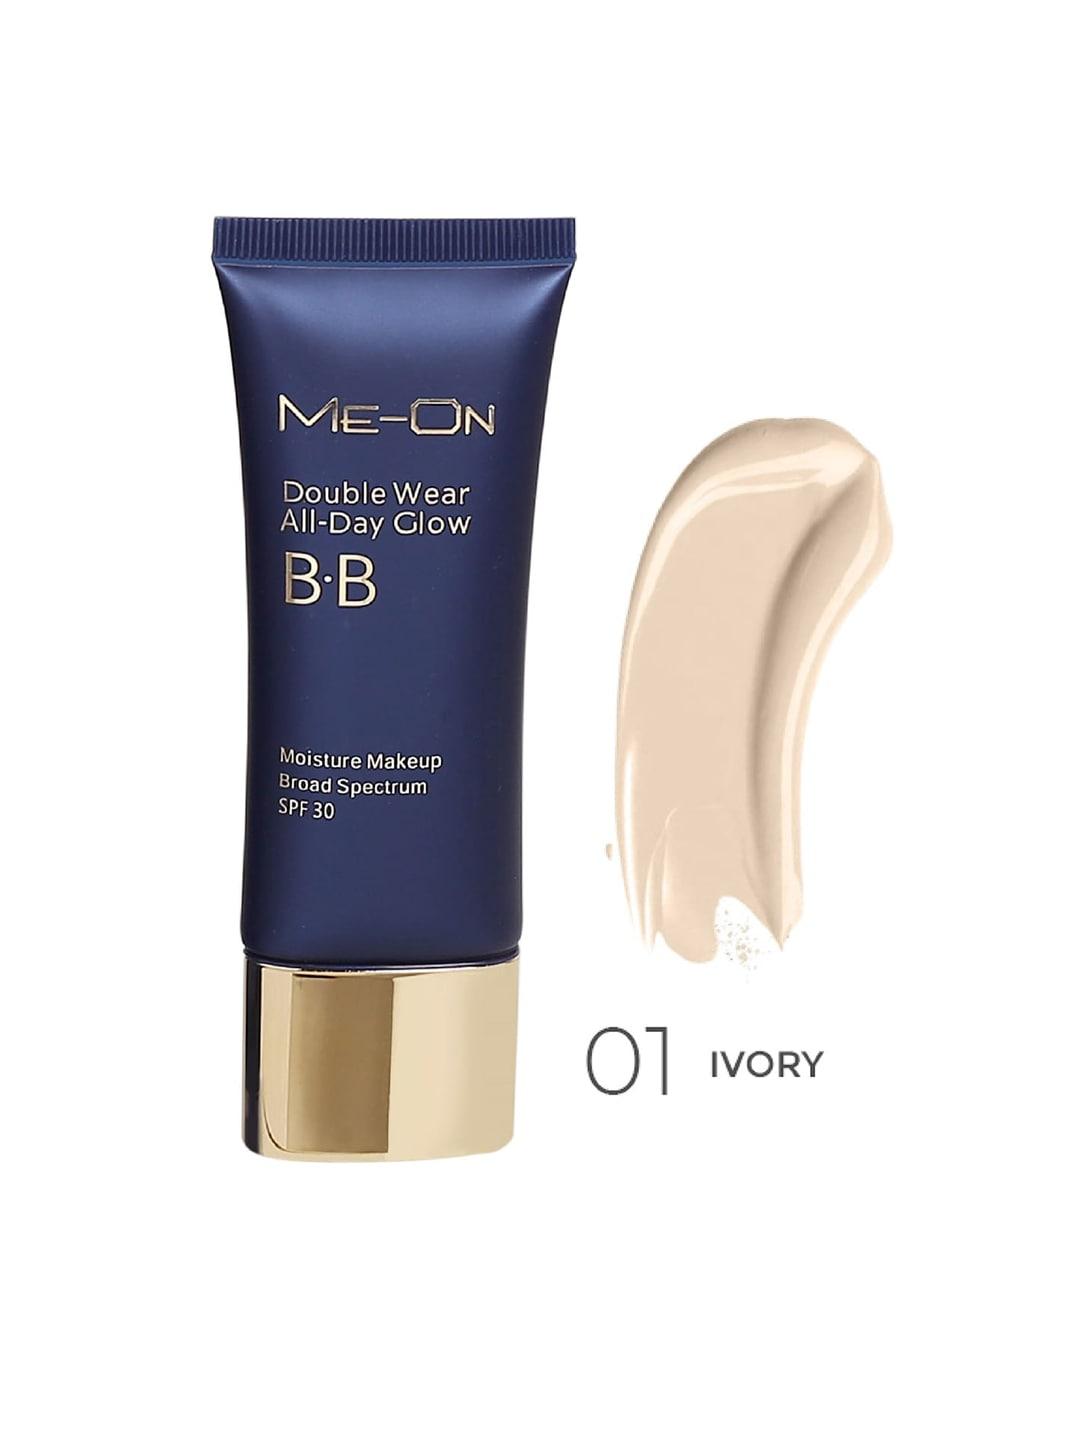 me-on double wear all-day glow spf30 bb cream foundation - shade 01